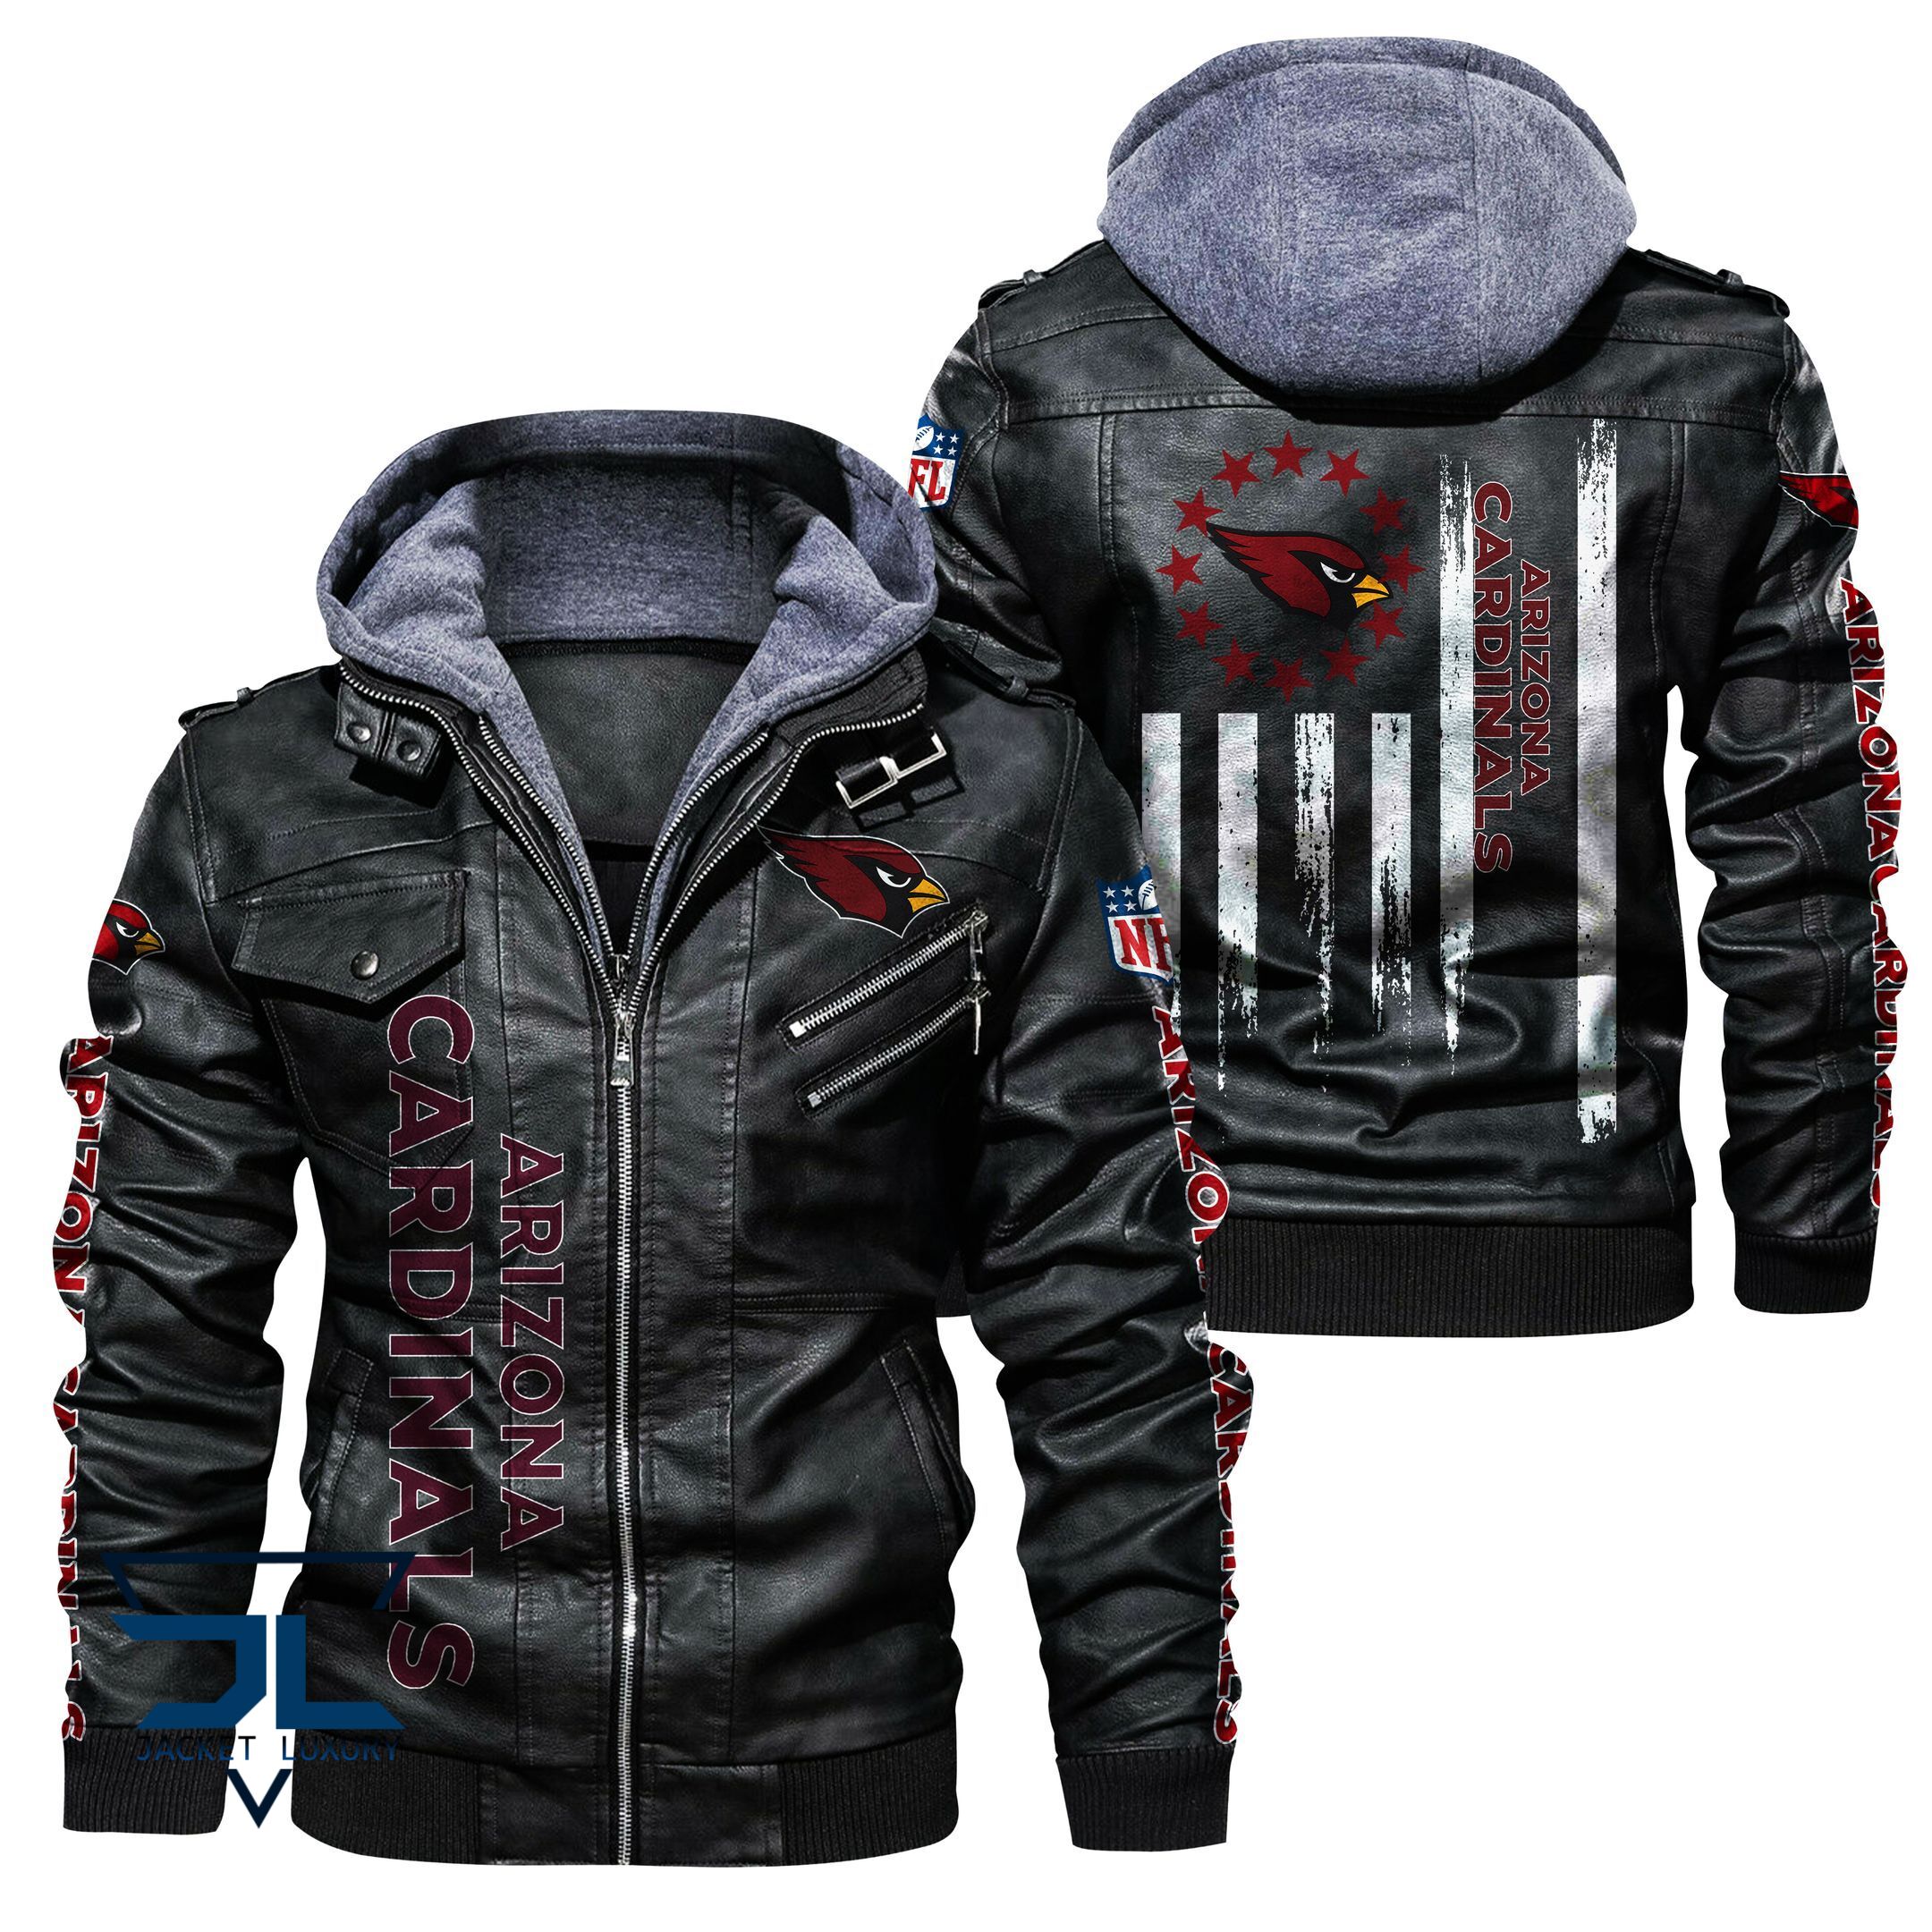 The most popular jacket on Tezostore 383